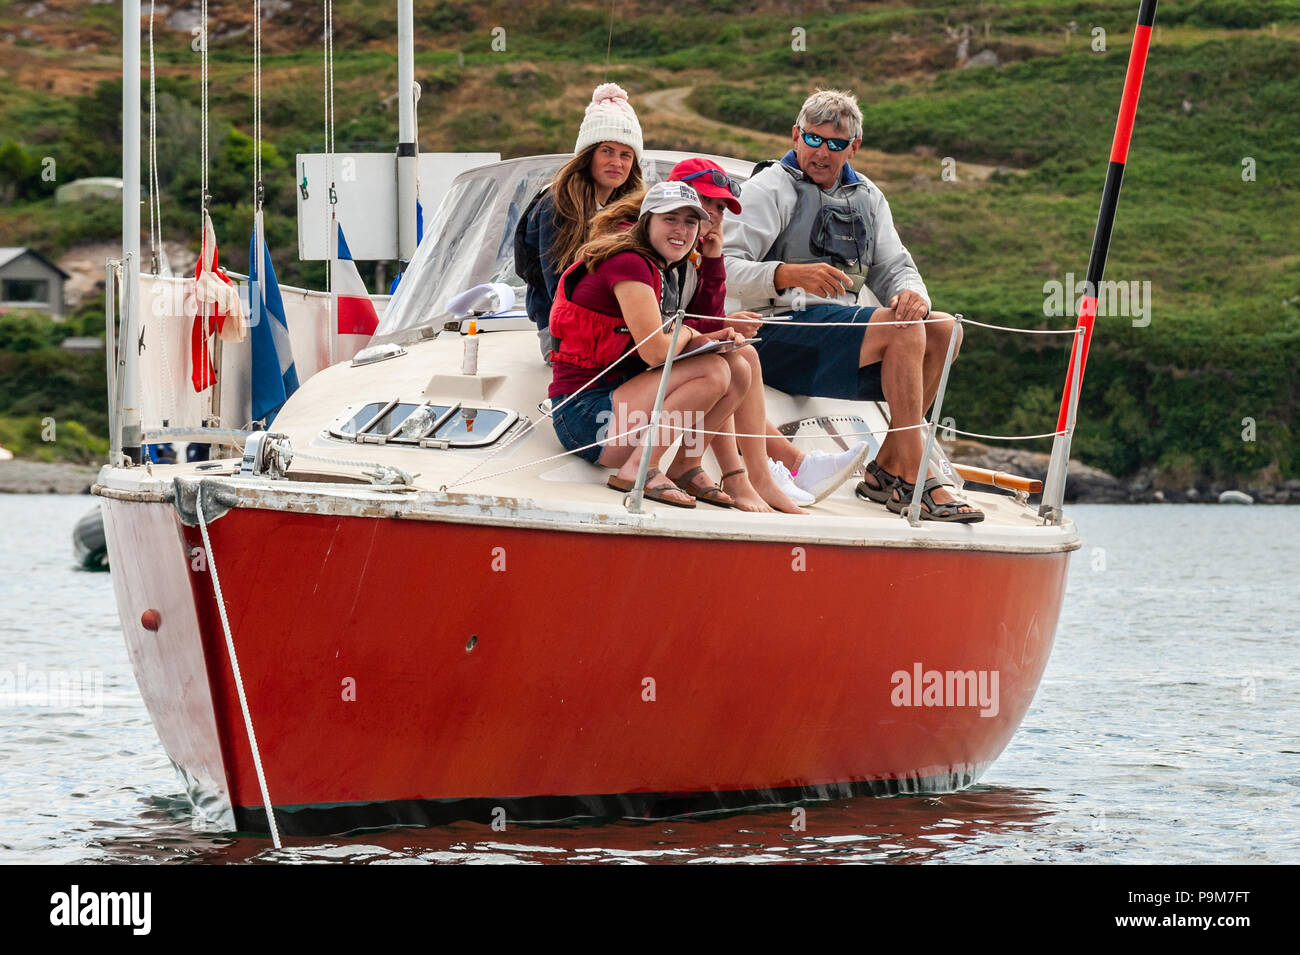 Schull, West Cork, Ireland. 19th July, 2018. Young people come from all over the island of Ireland, including the North, to take part in the schools regatta which is aimed at novice racing sailors. The Committee Boat during the races, staffed by volunteers. Credit: Andy Gibson/Alamy Live News. Stock Photo